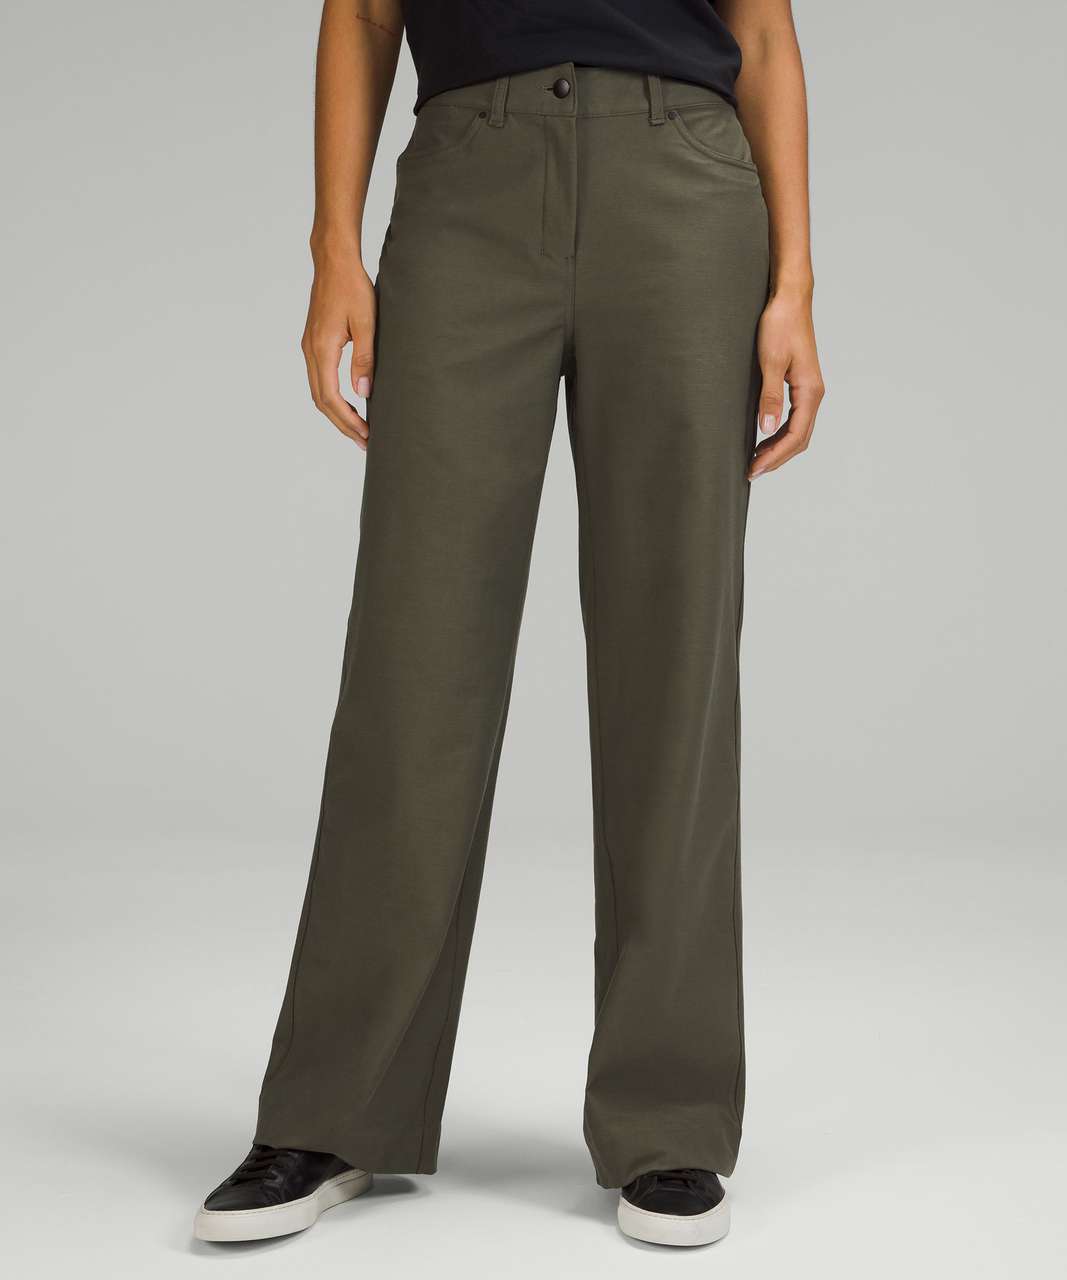 Lululemon City Sleek Pant NWOT Brown Size 4 - $69 (53% Off Retail) - From  Avery